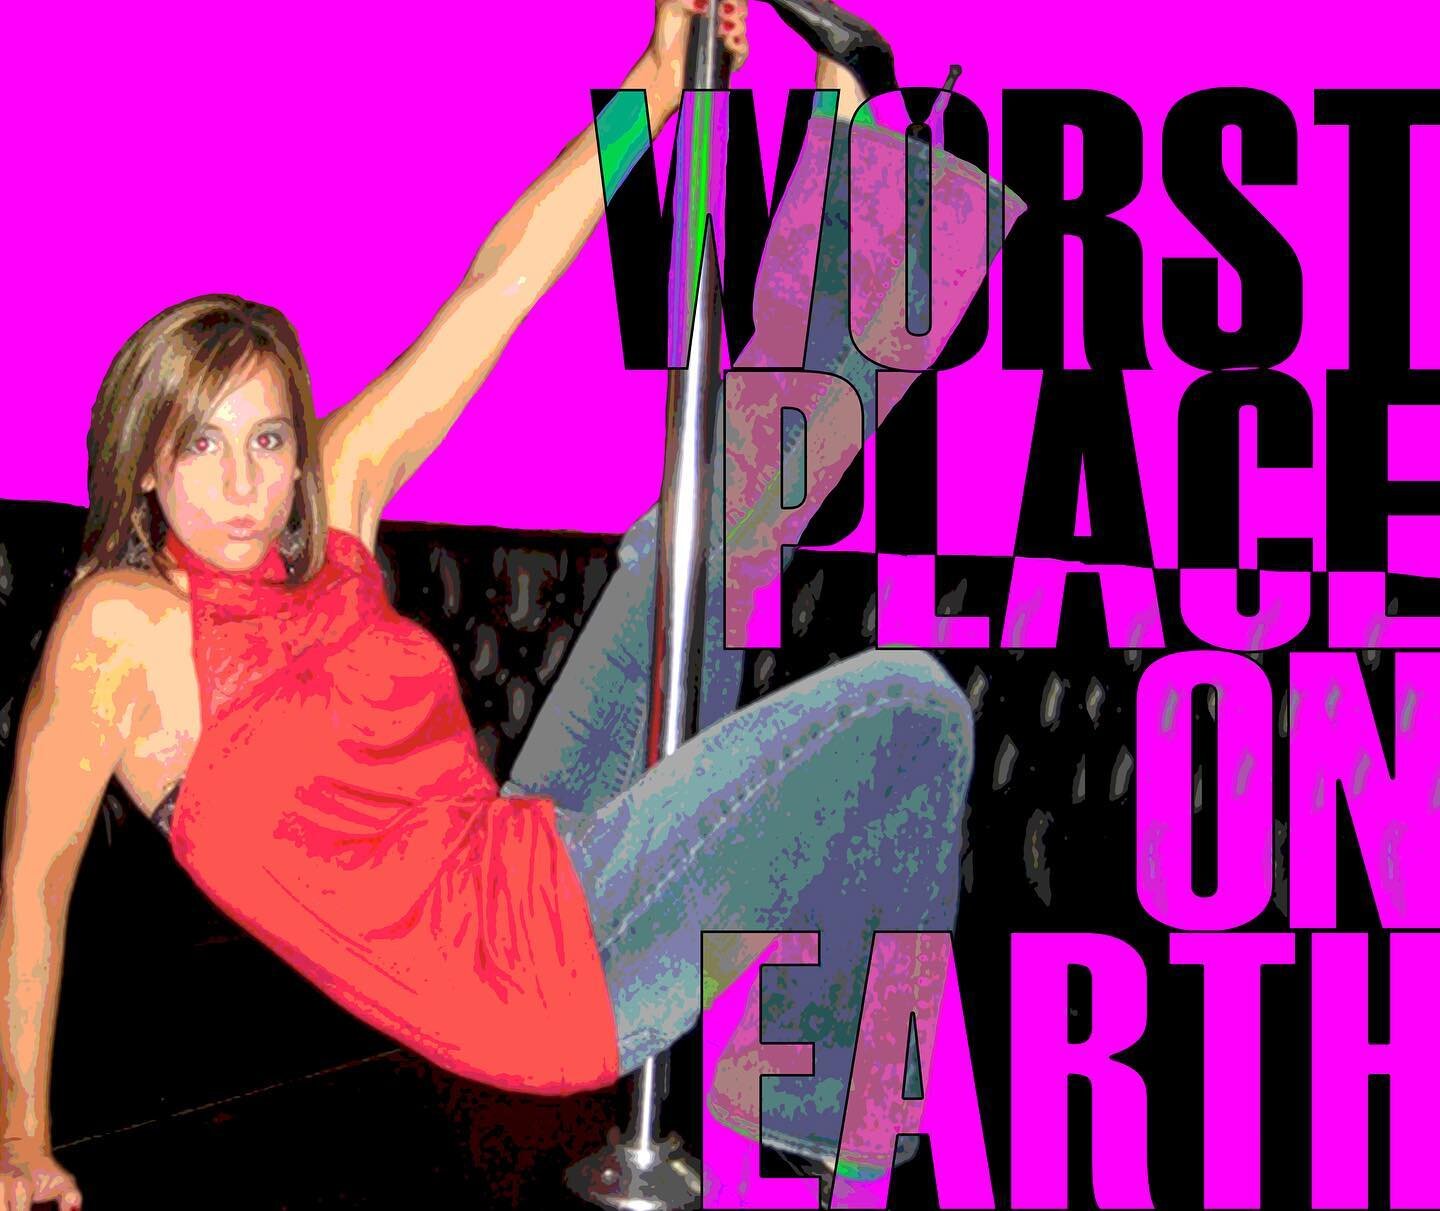 Episode 19 of @worstplaceonearthpodcast out now! Find out why the STRIPPER POLE is the unofficial State Animal of #Florida &hellip; #floridaman #floridawoman #onlyinflorida #loveinthetimeofcorona